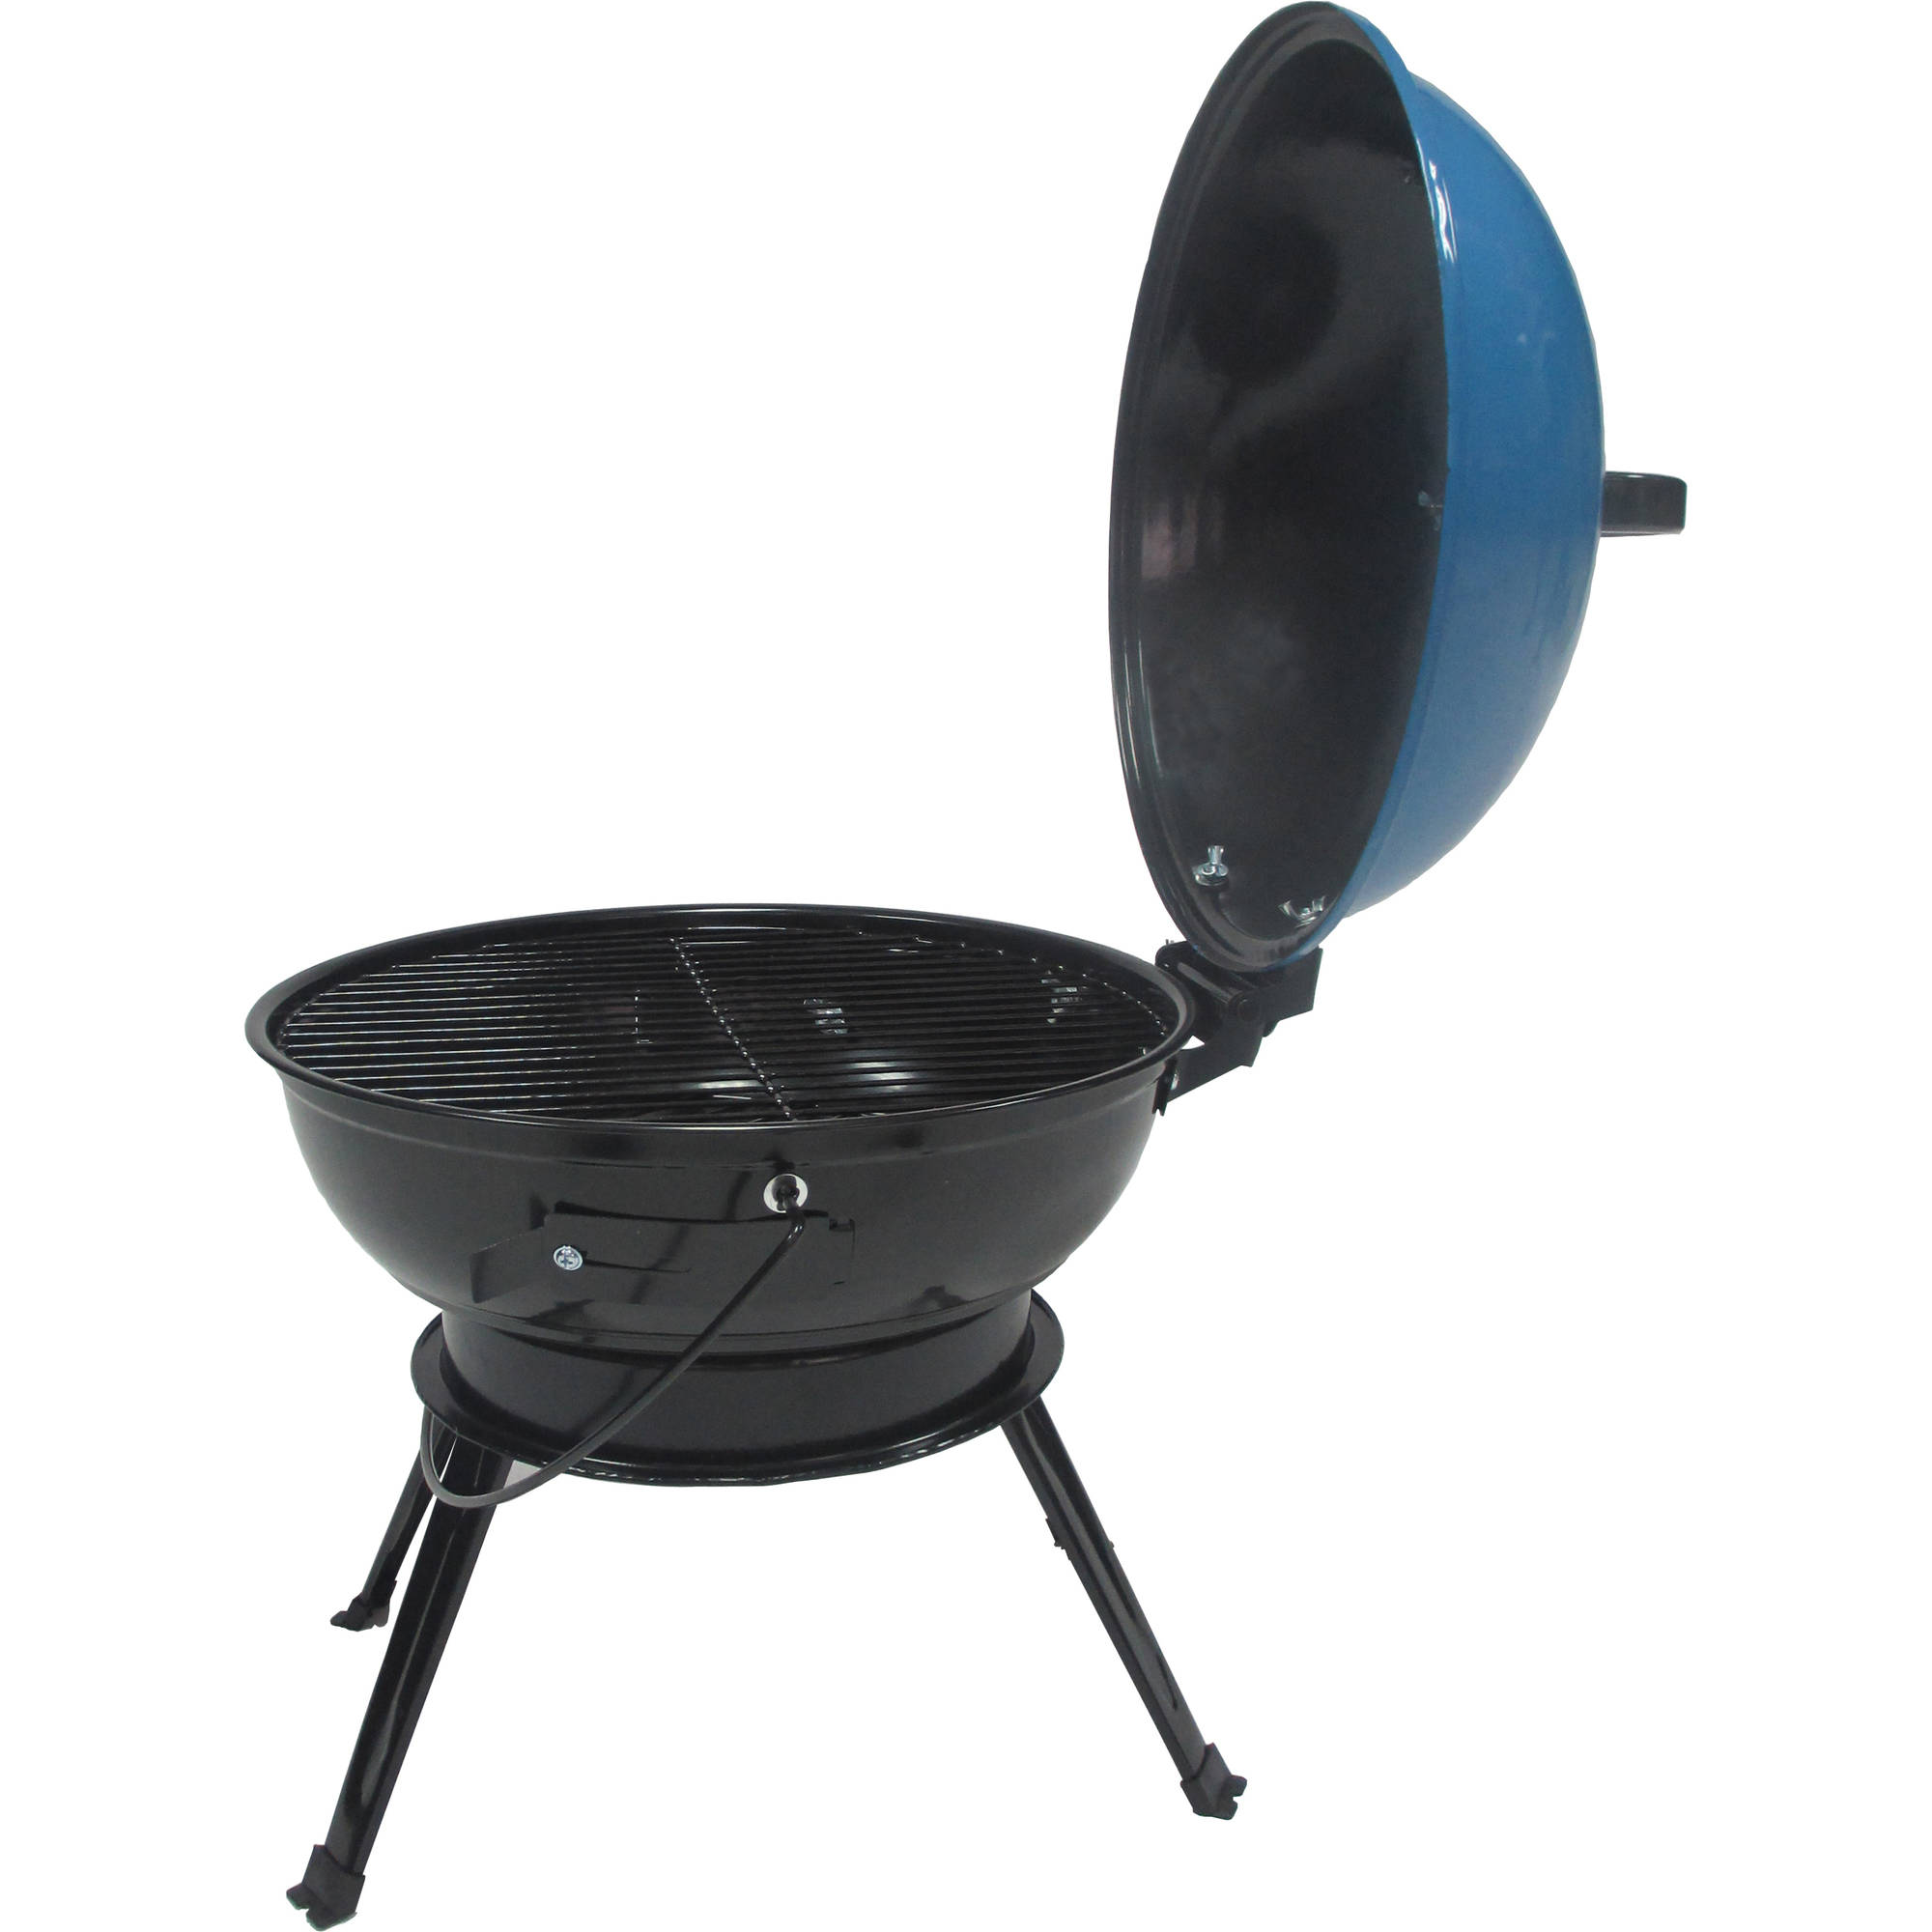 Expert Grill 14.5" Portable Charcoal Grill, Summer Lagoon - image 2 of 2